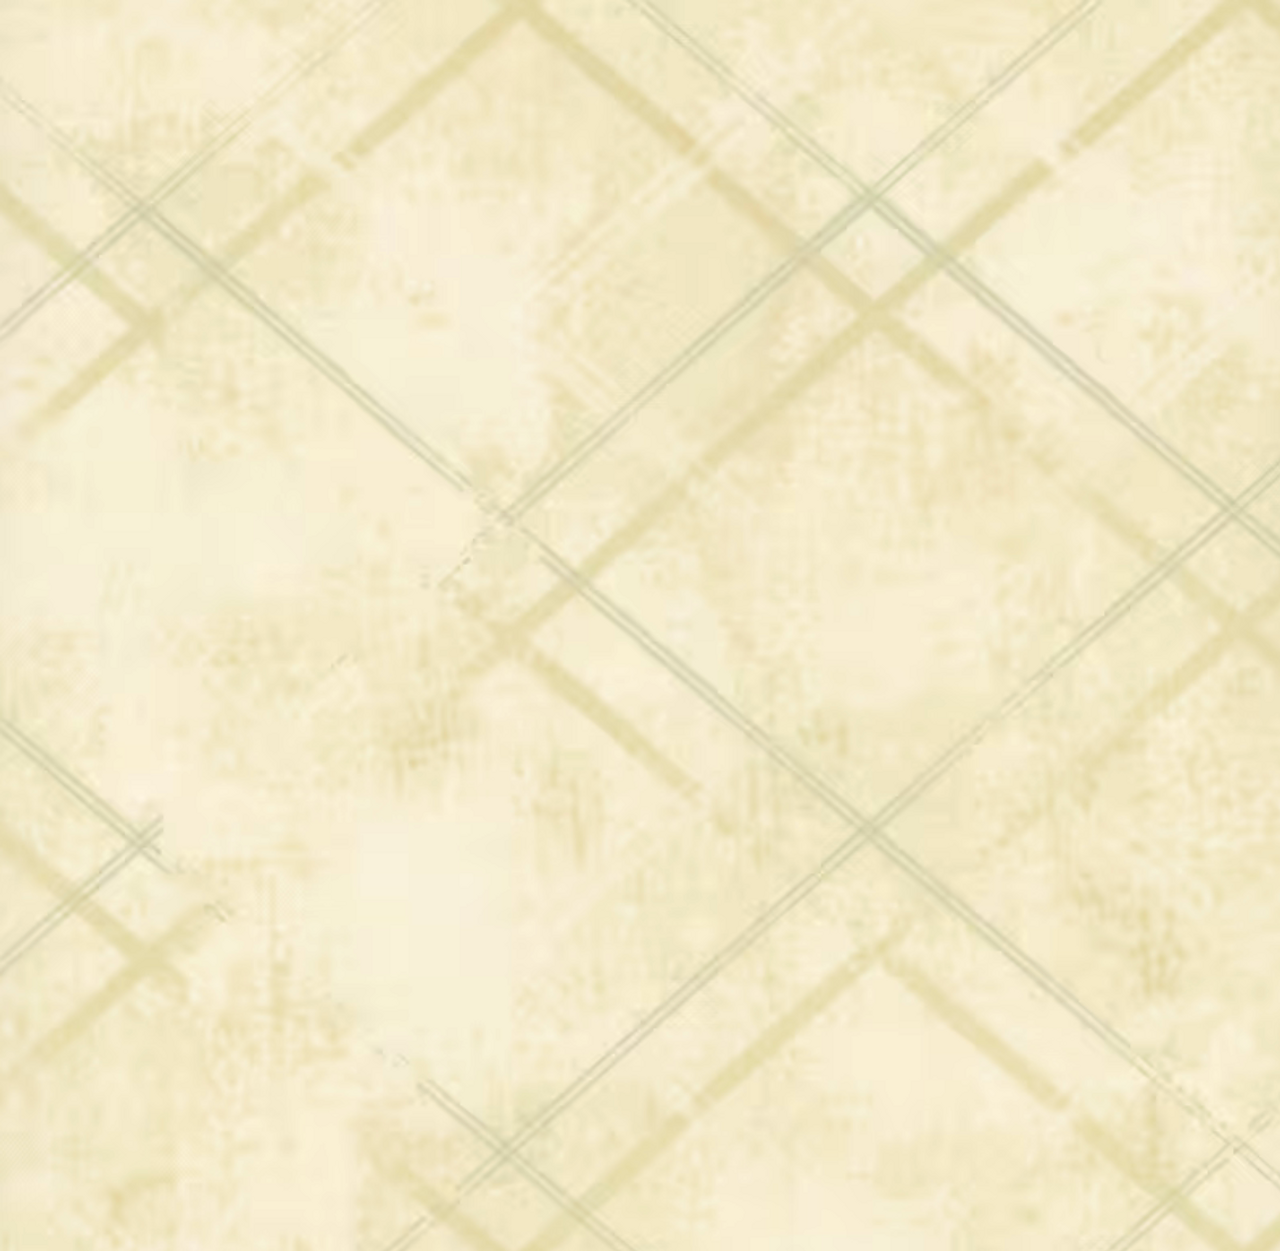 Henry Glass One Sister Distressed Bias Plaid Cream Fabric By The Yard